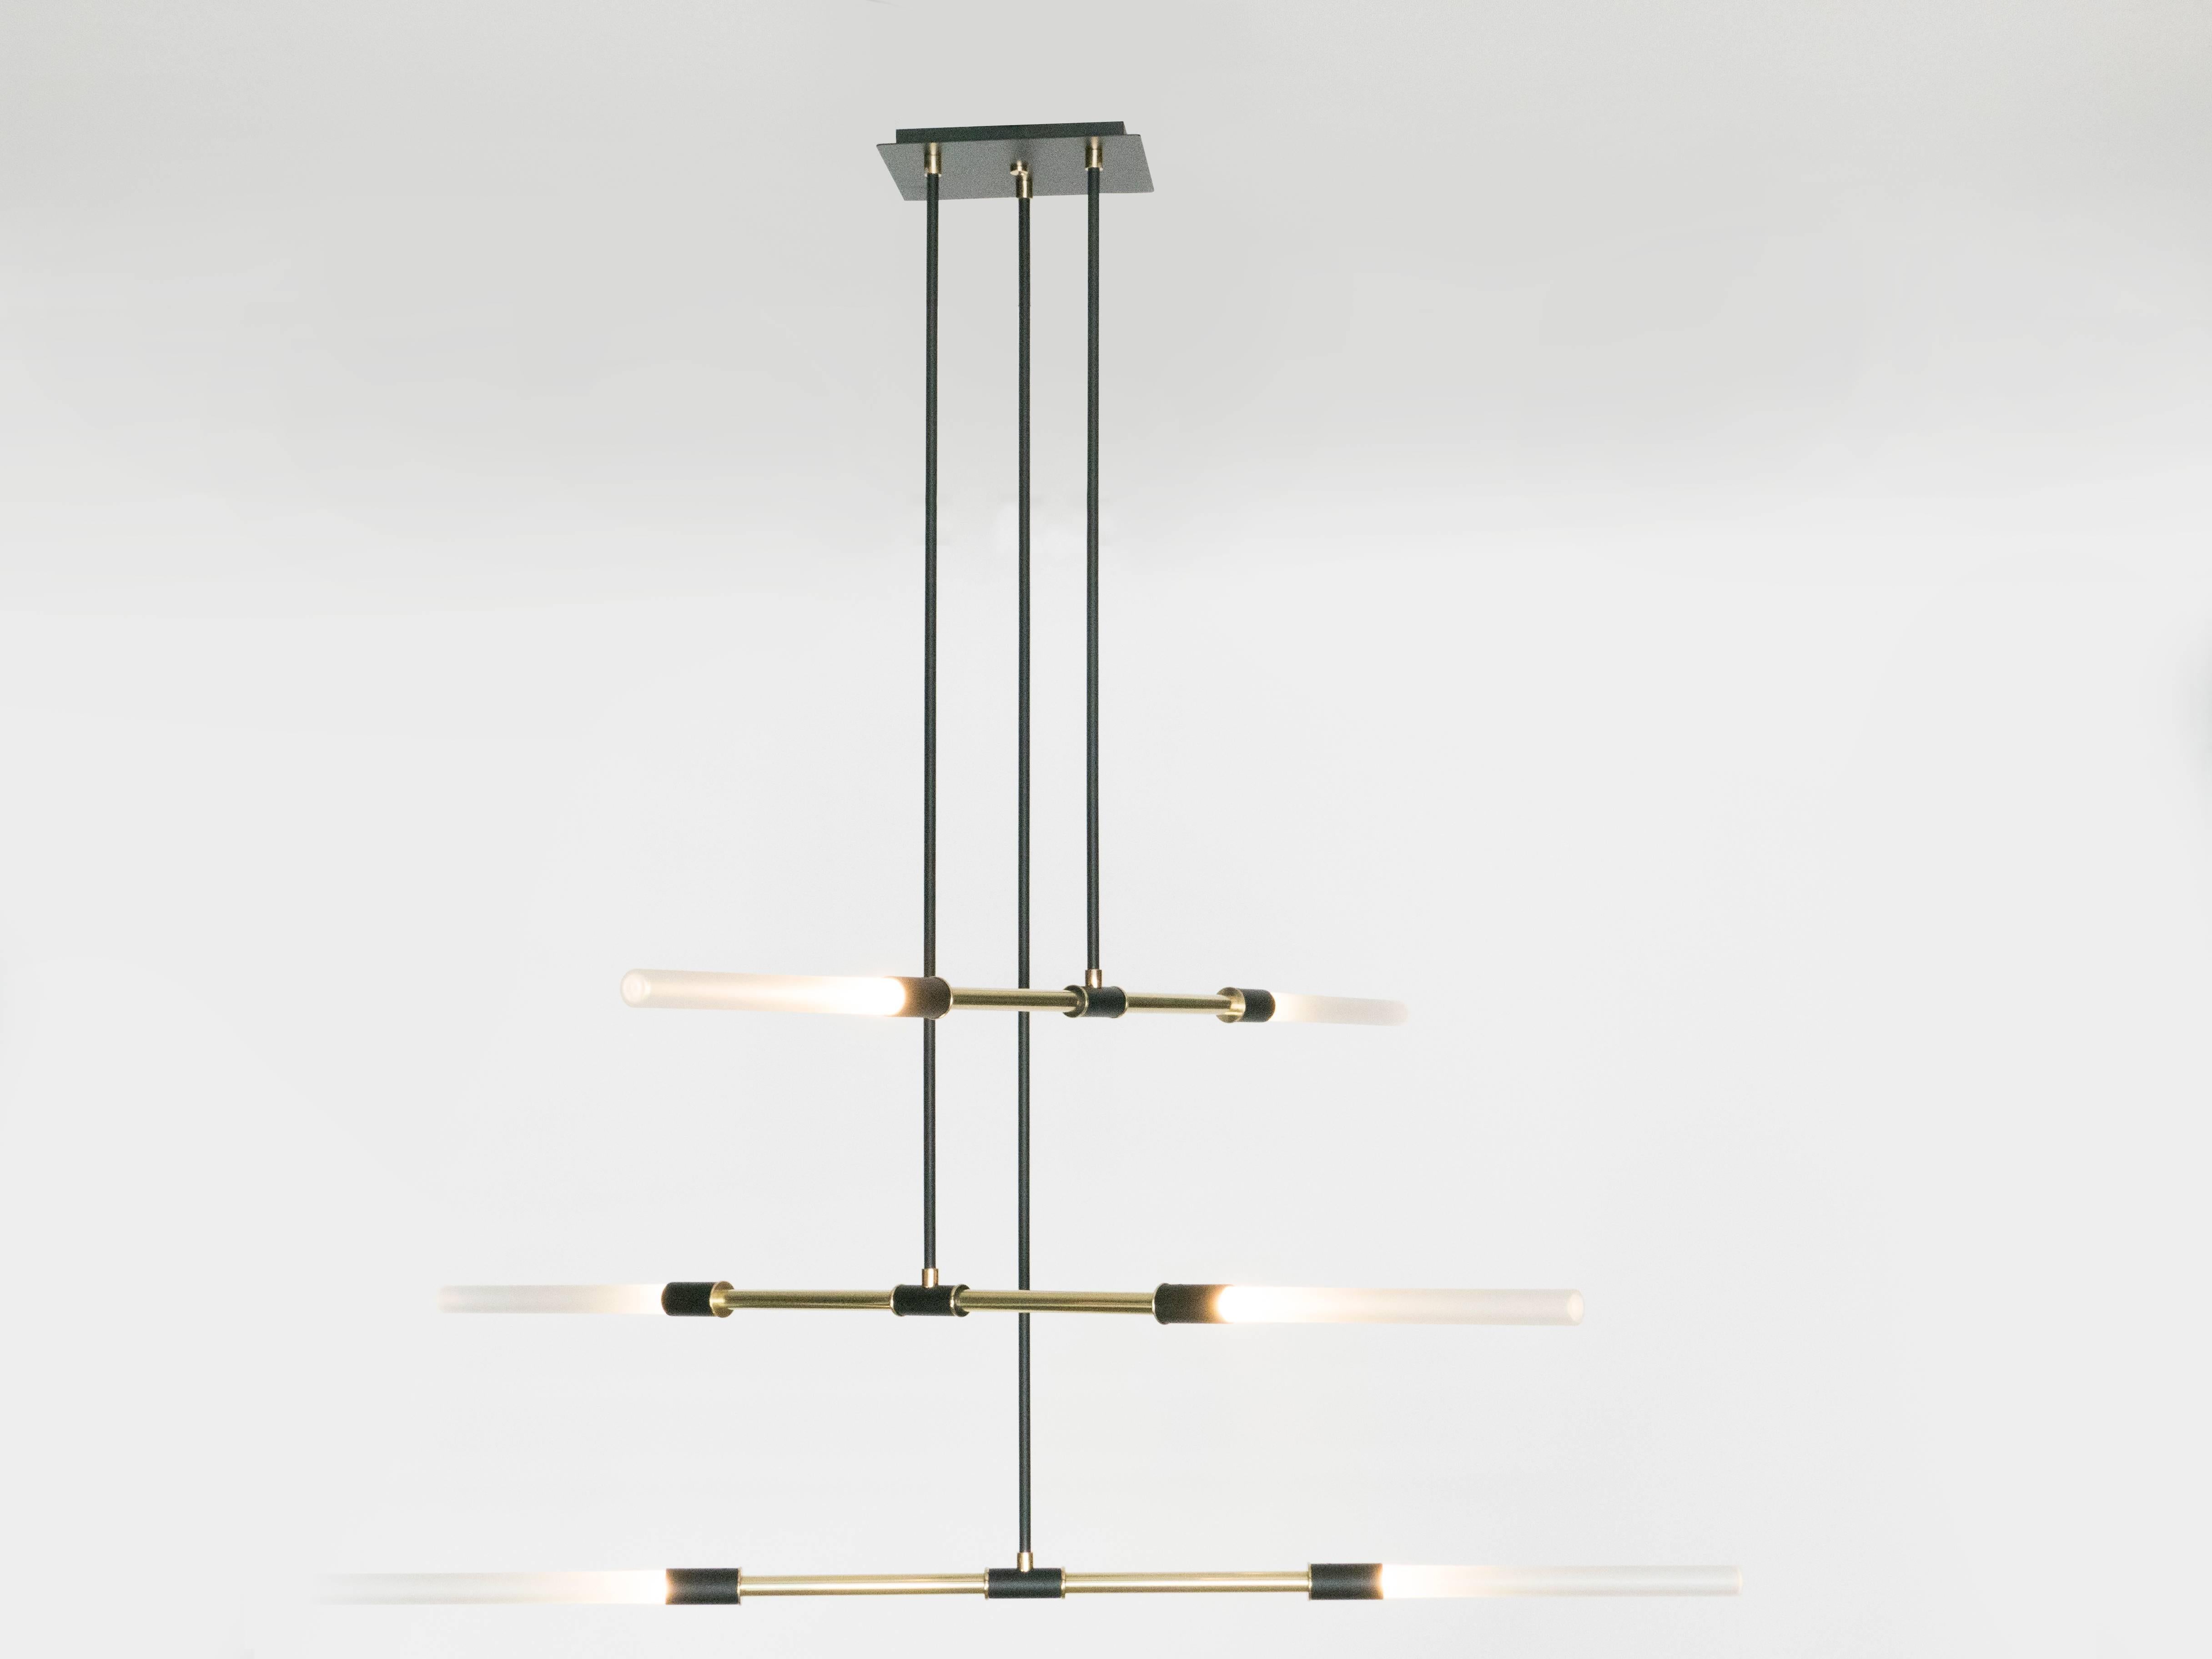 The focal point of this impressive chandelier are the six frosted handblown glass swords which shot out light in different angle. The mix of brass, frosted glass and black enamel finish come together to create a large-scale chandelier which diffuses